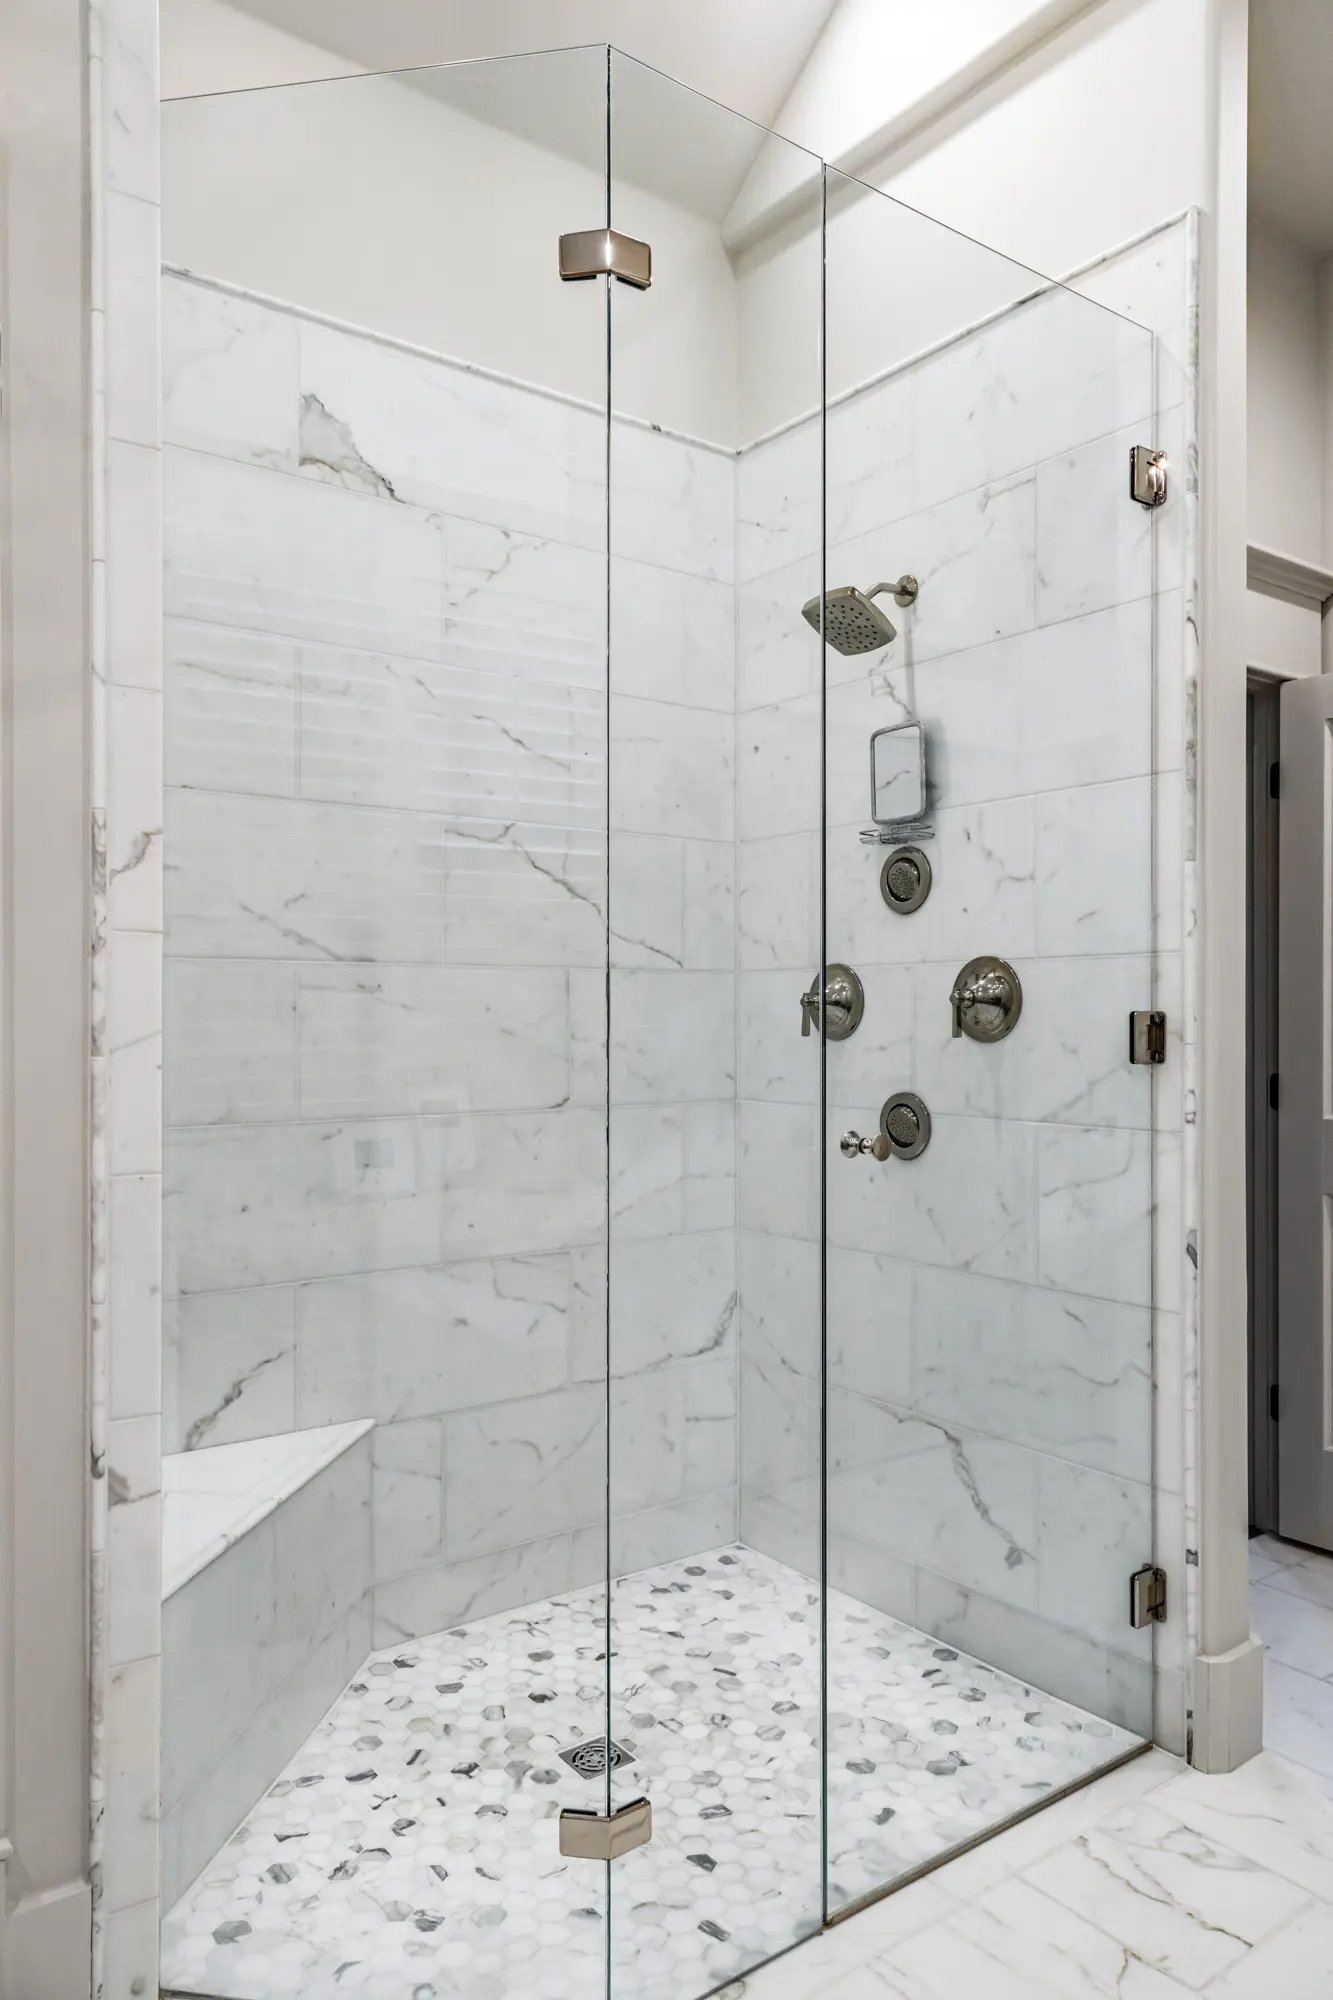 Elegant marble-tiled walk-in shower with pebble floor and modern chrome shower fixtures.